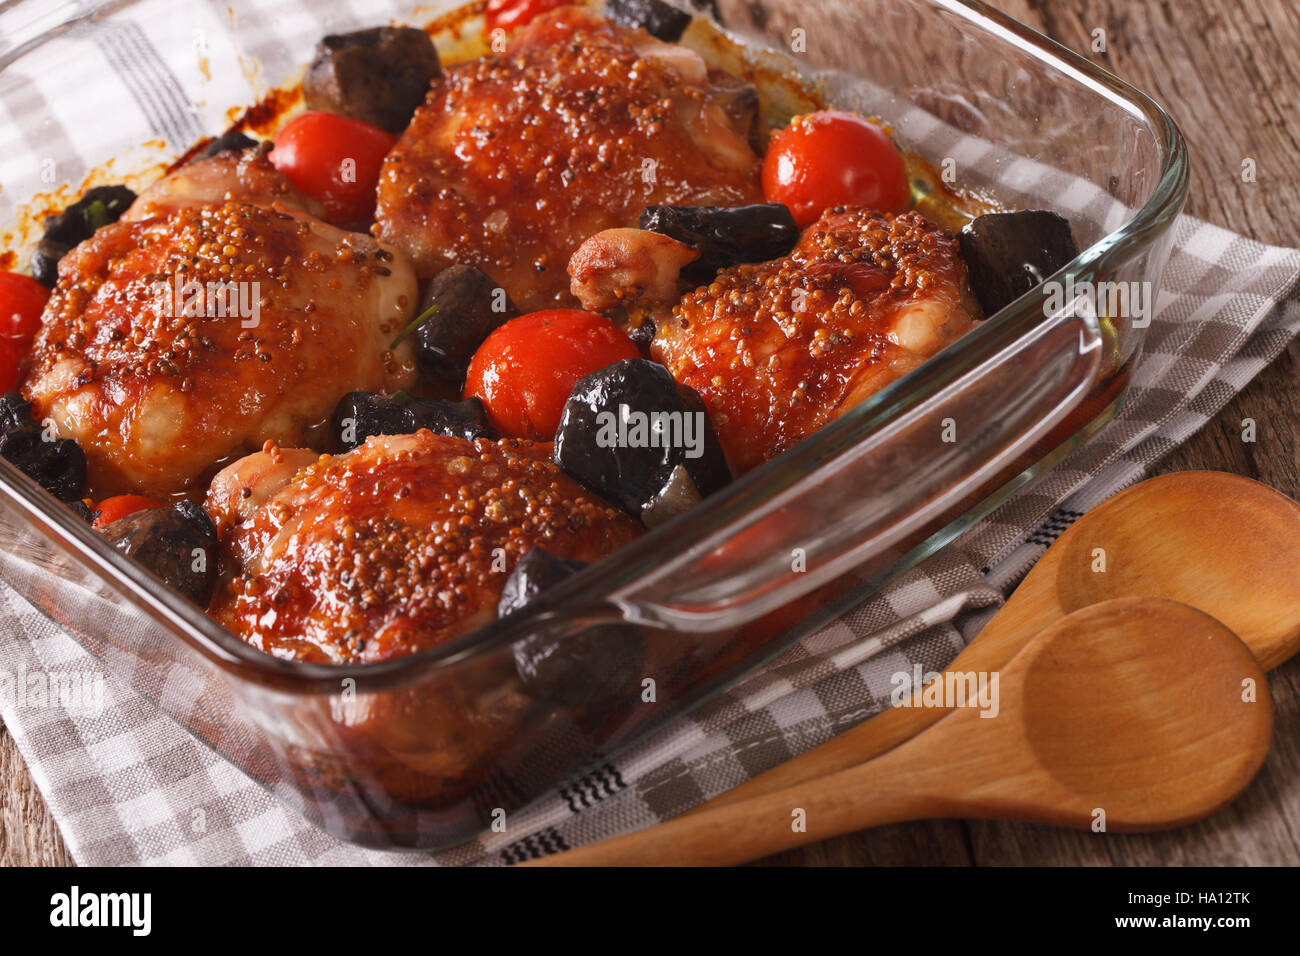 Baked chicken thigh with mustard, tomatoes and wild mushrooms close up in baking dish on the table. horizontal Stock Photo